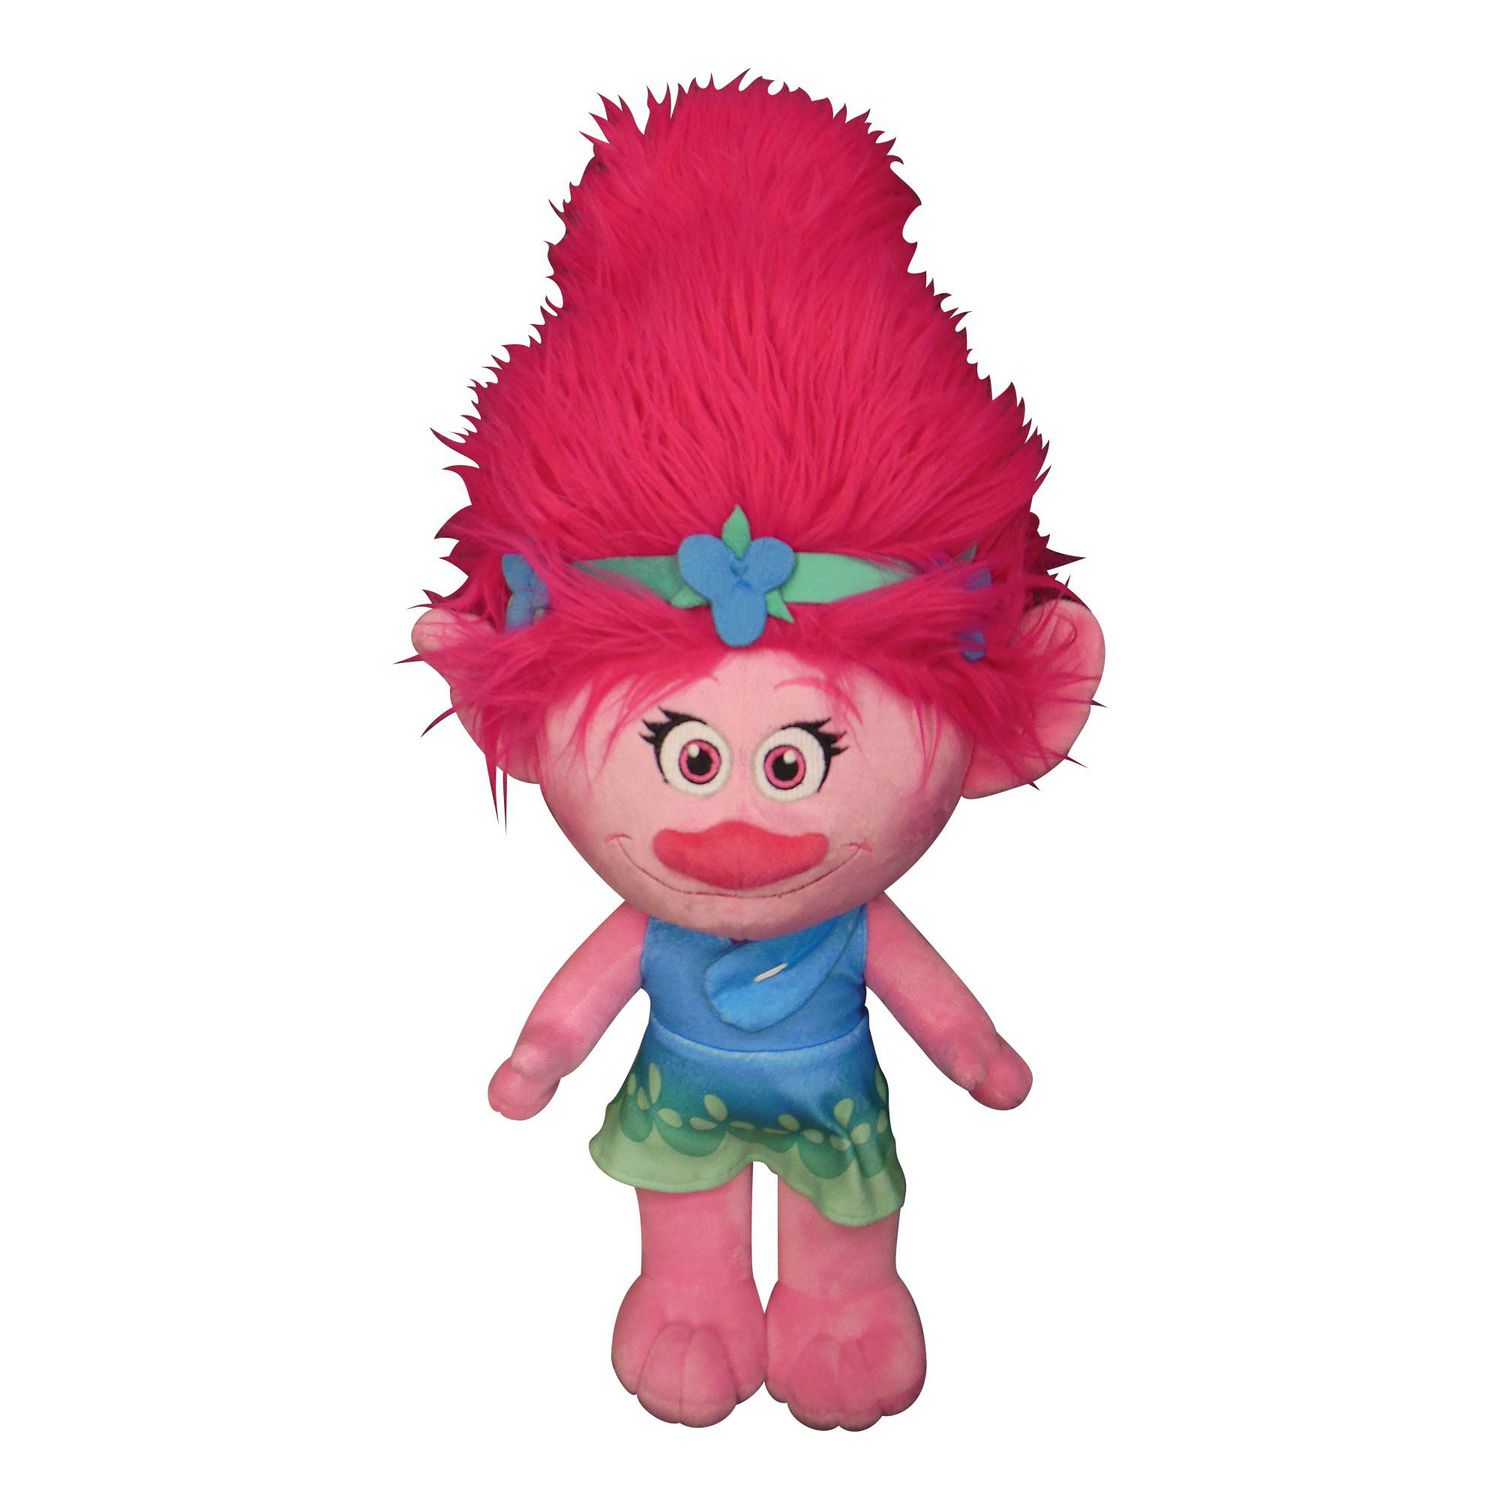 Trolls Dreamworks Poppy Plush The One And Only Cuddle Pillow 22" New